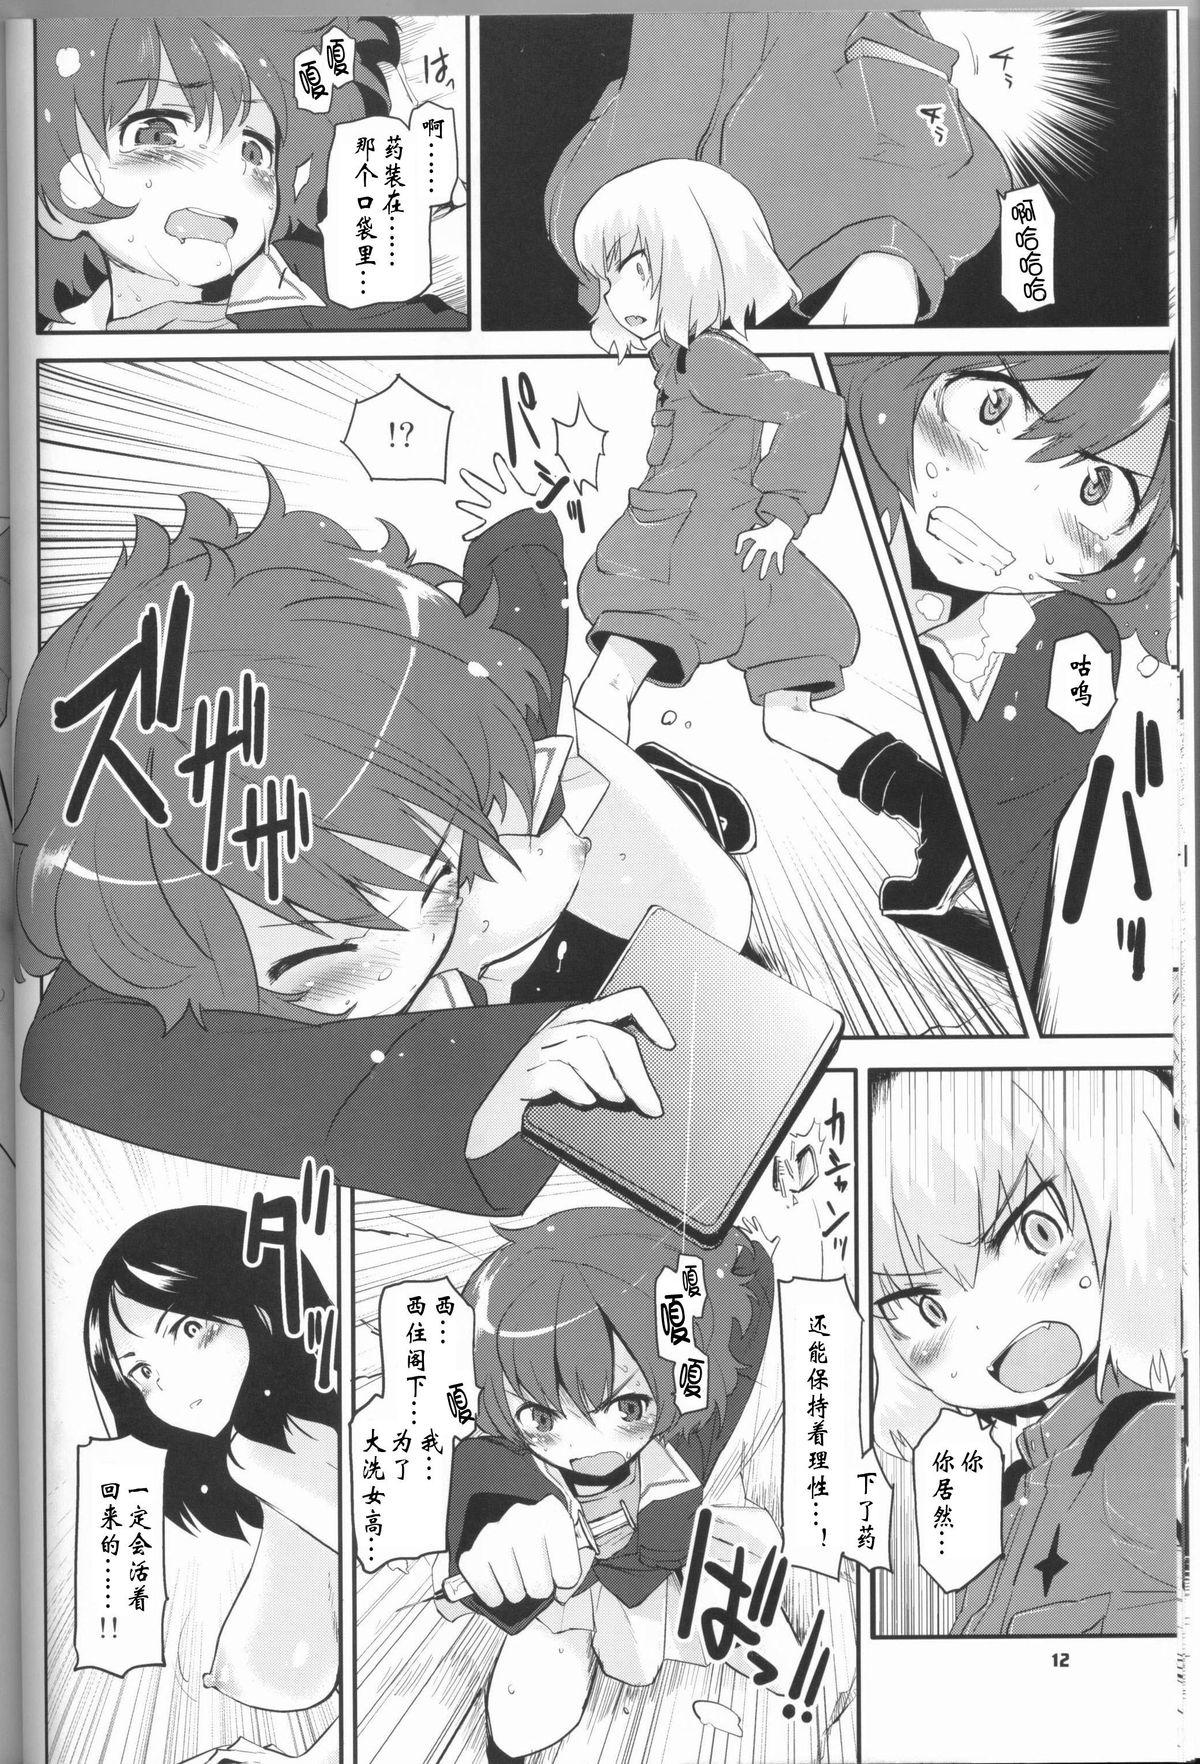 Bangbros The General Frost Has Come! - Girls und panzer Slapping - Page 11